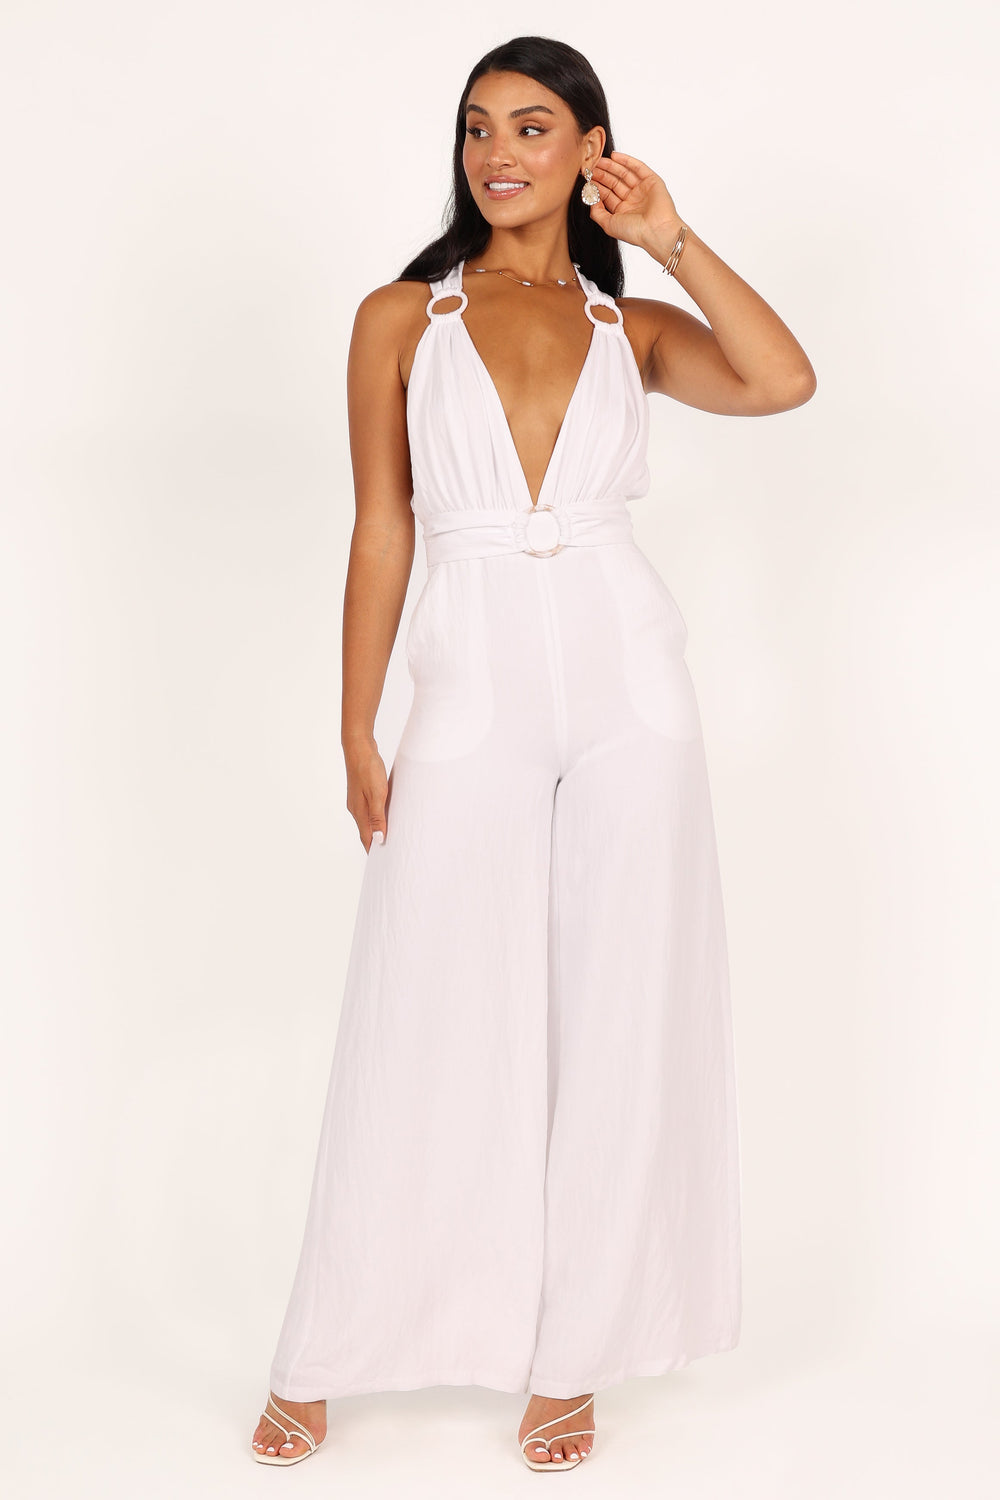 Petal and Pup USA JUMPSUITS Imani Belted Jumpsuit - White